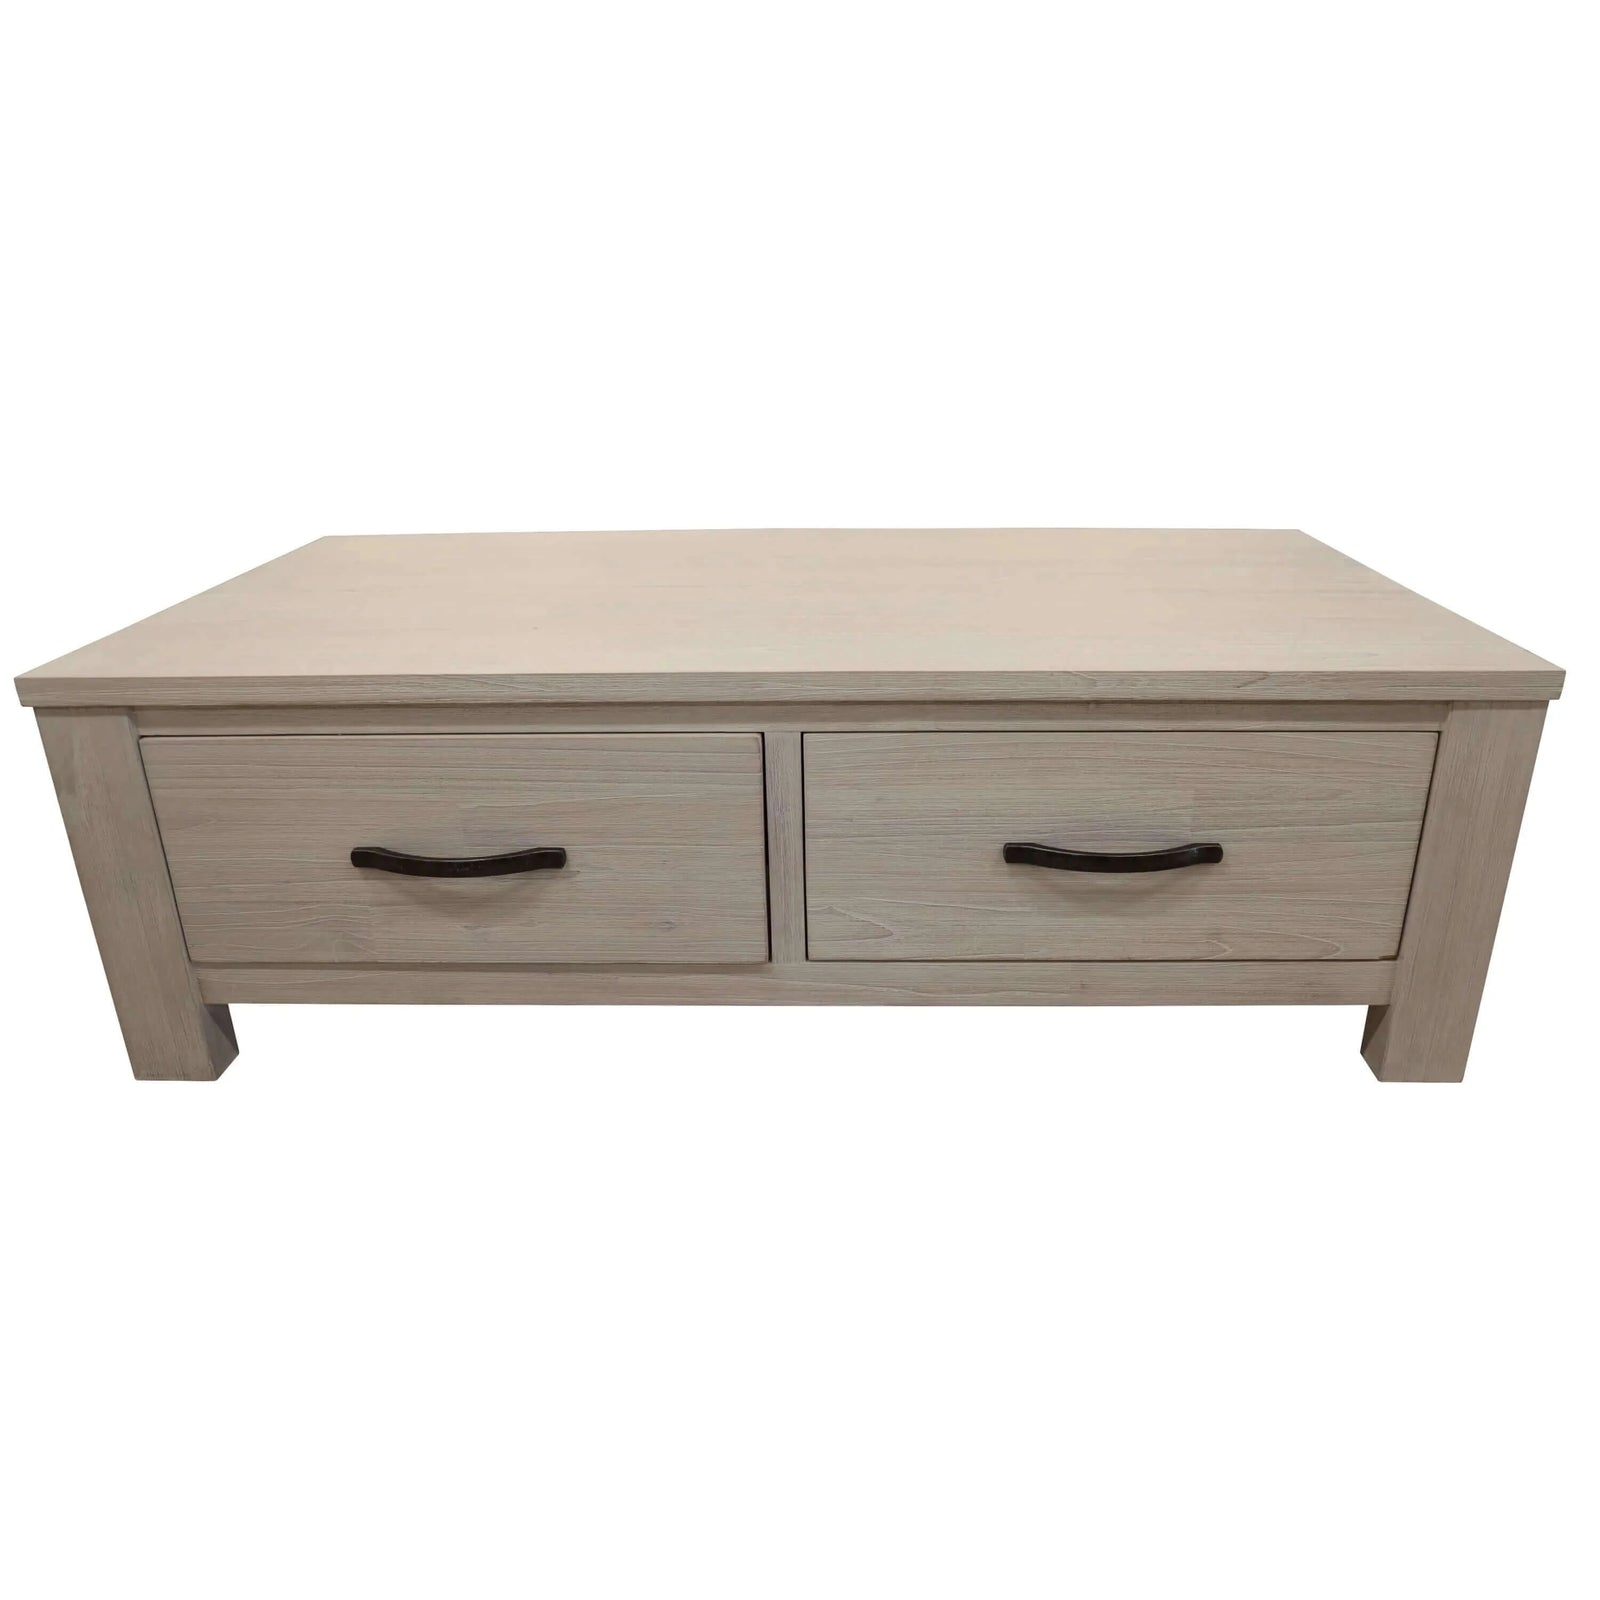 Buy Foxglove Coffee Table 127cm 2 Drawer Solid Mt Ash Timber Wood – Upinteriors-Upinteriors